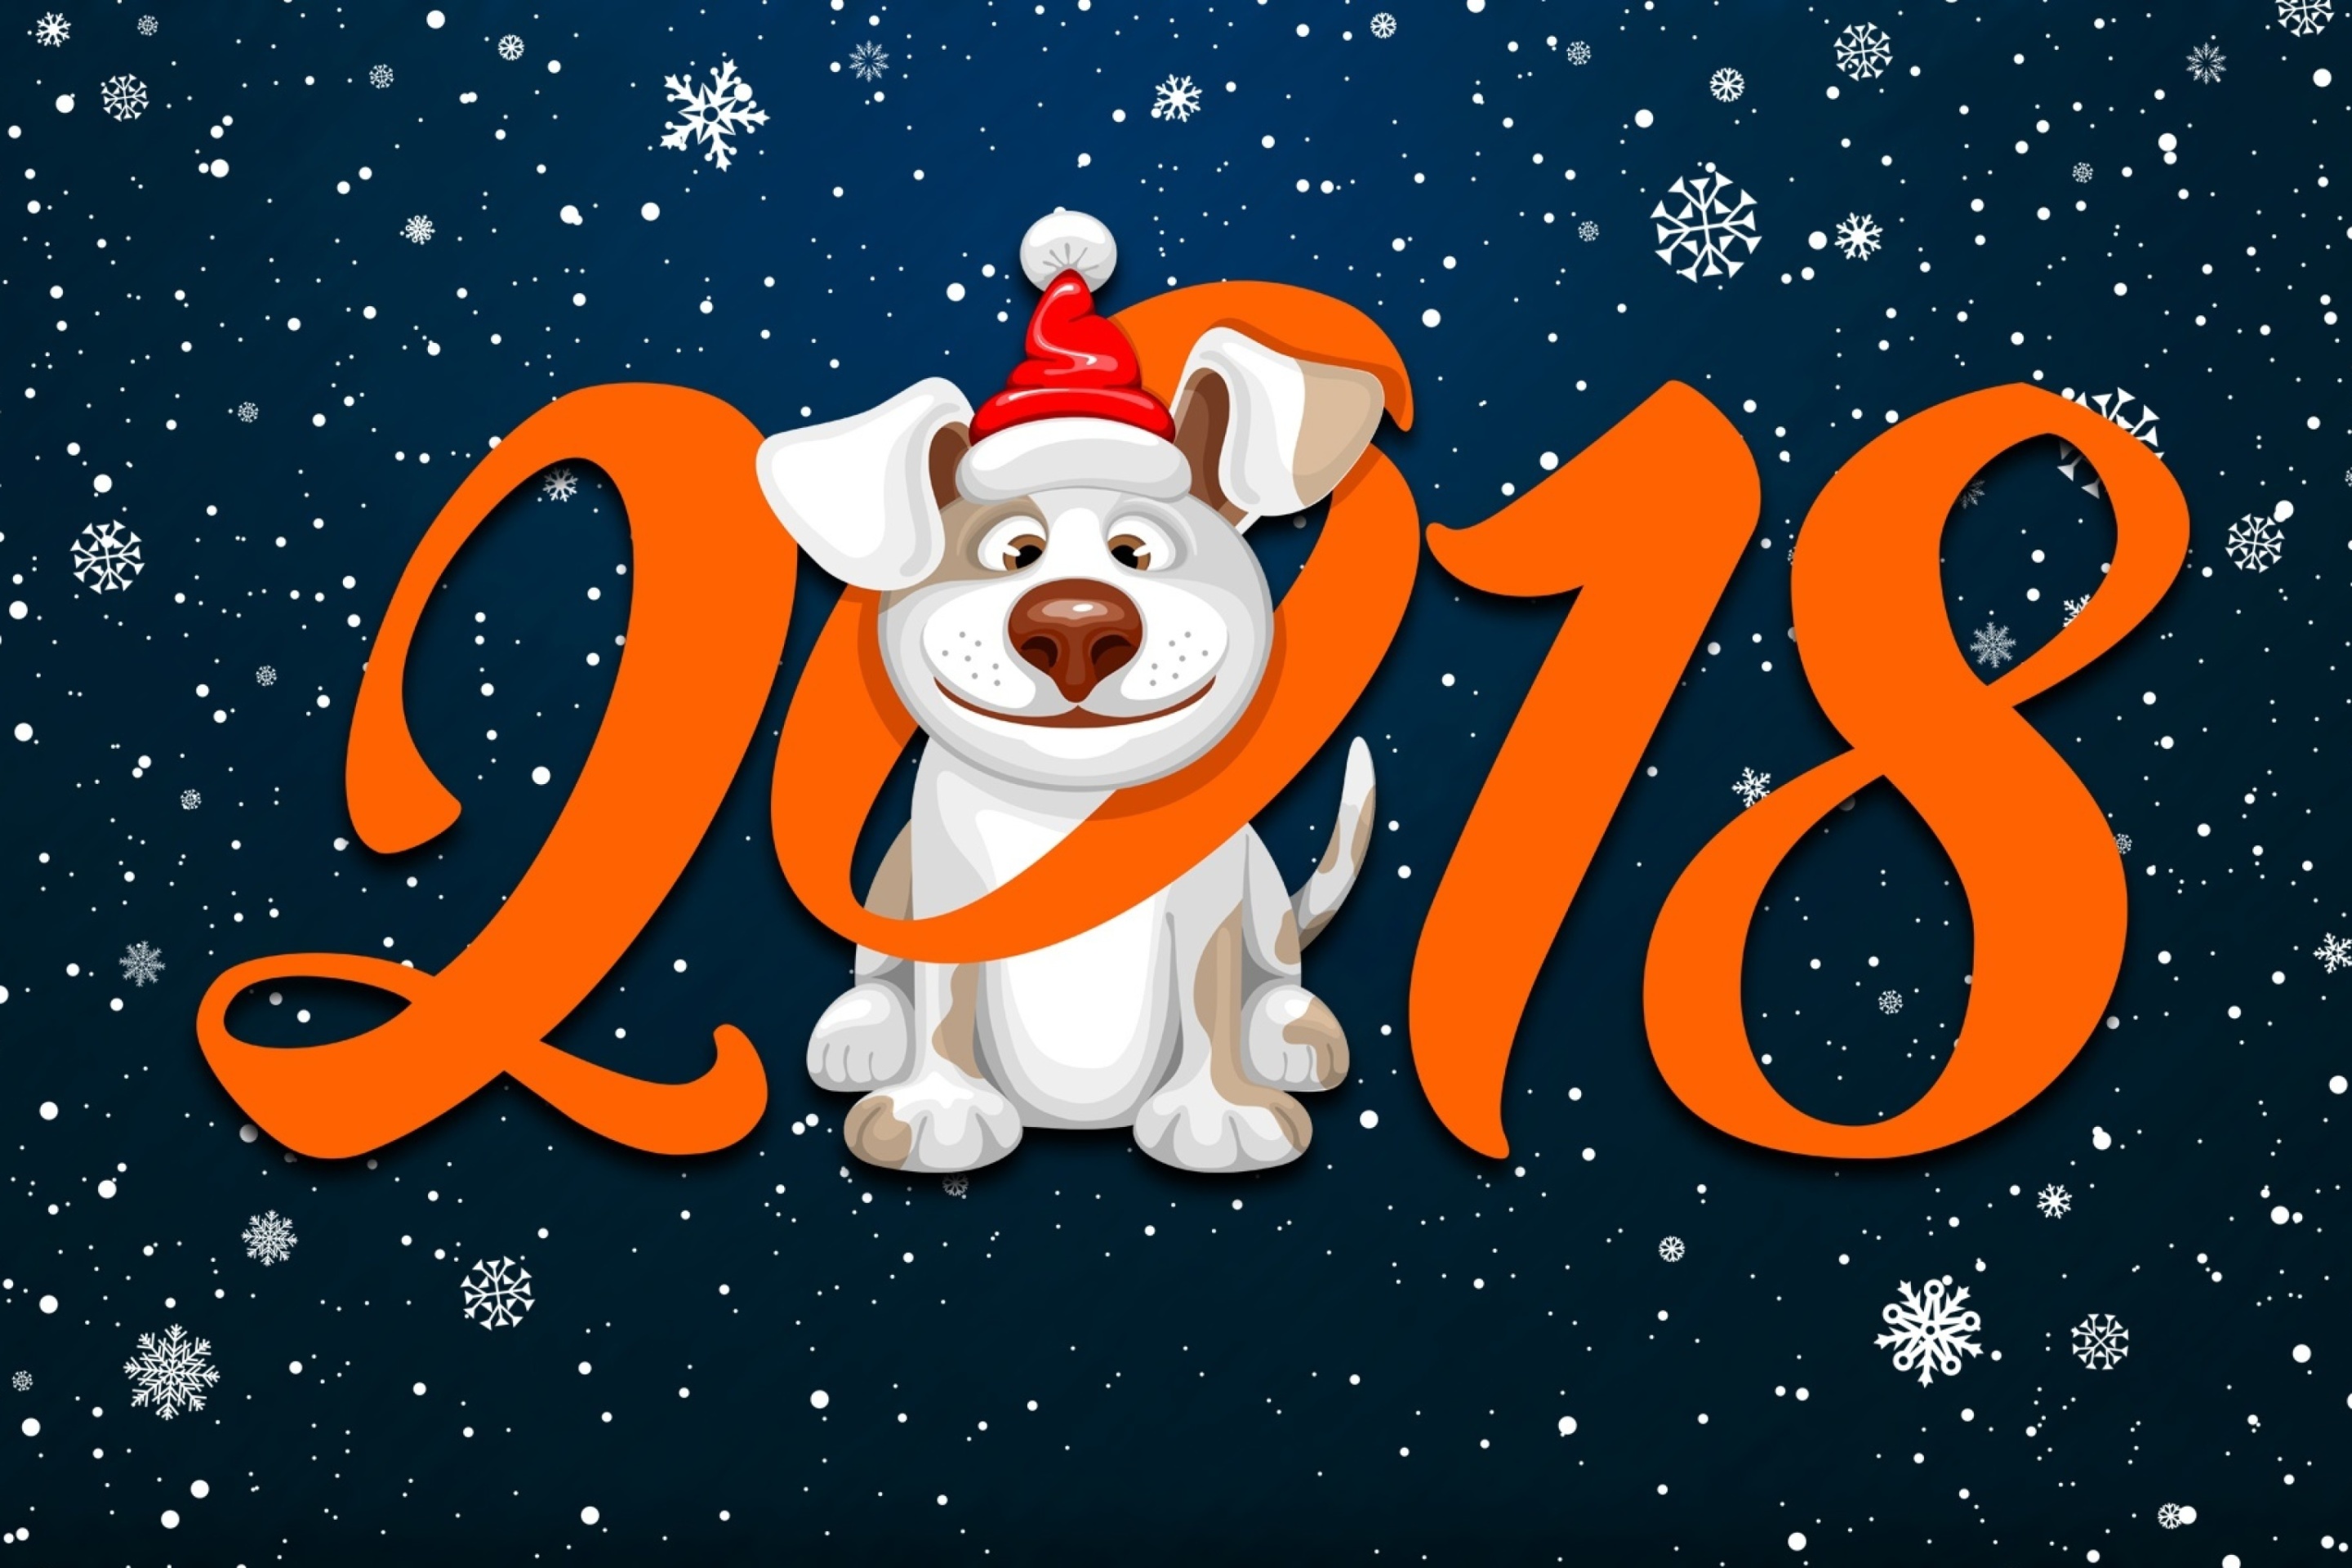 Das New Year Dog 2018 with Snow Wallpaper 2880x1920